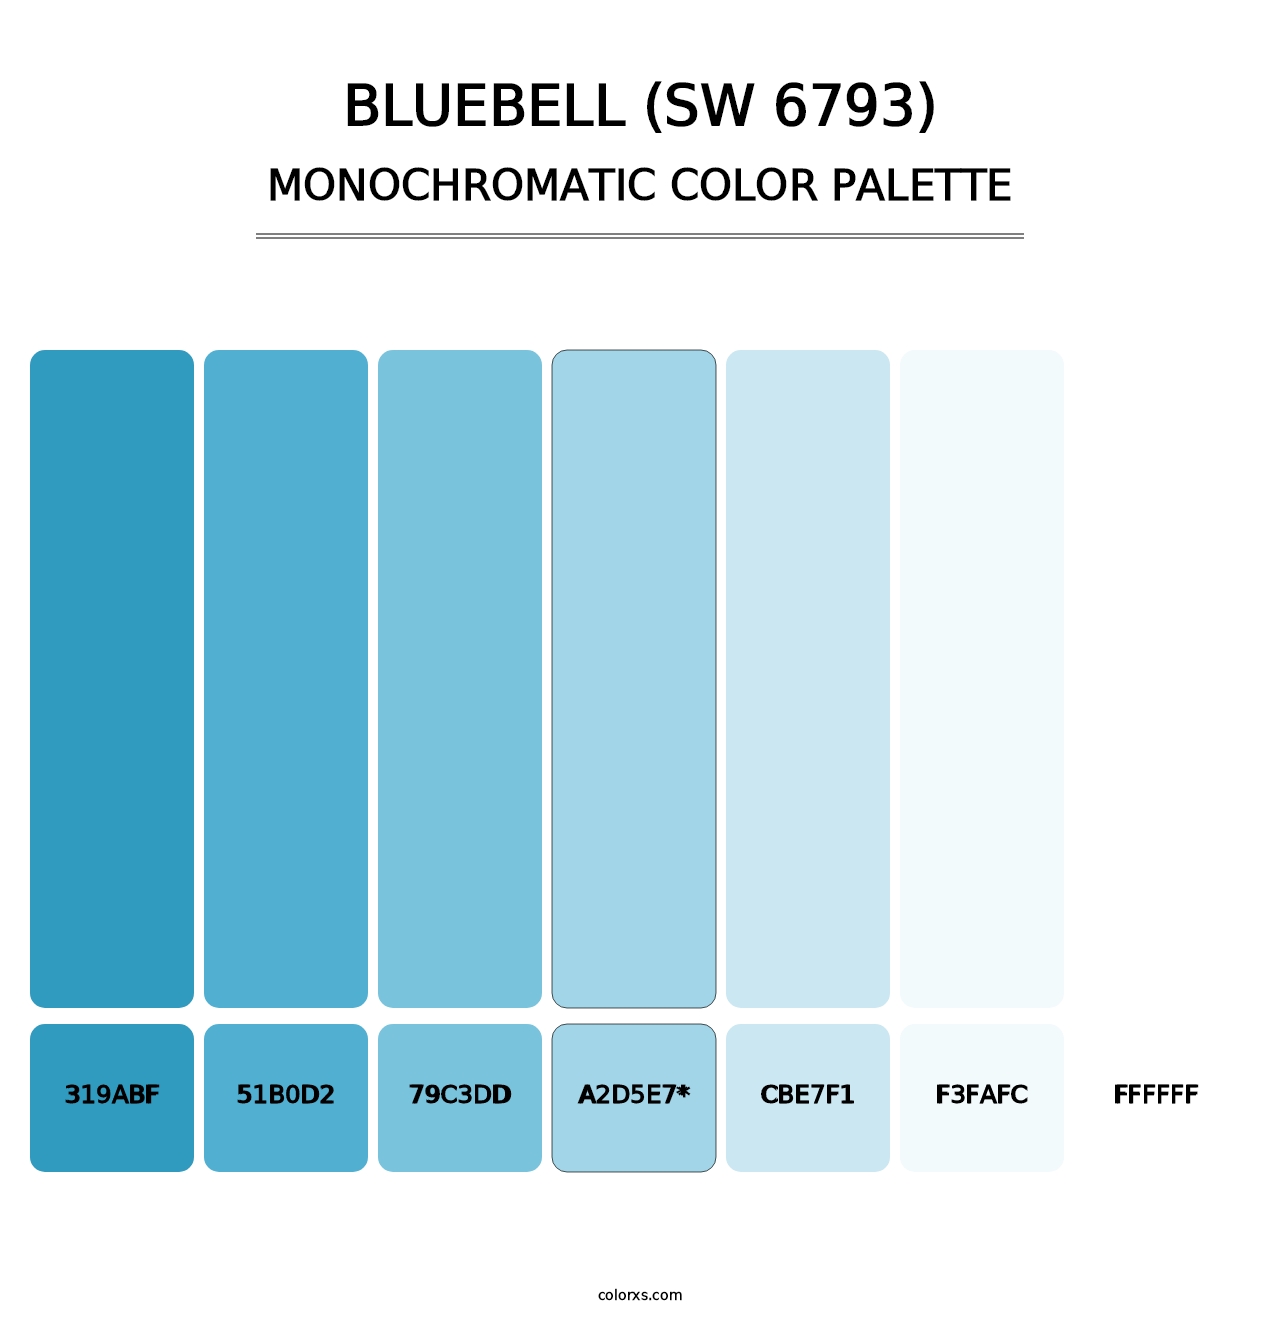 Bluebell (SW 6793) - Monochromatic Color Palette